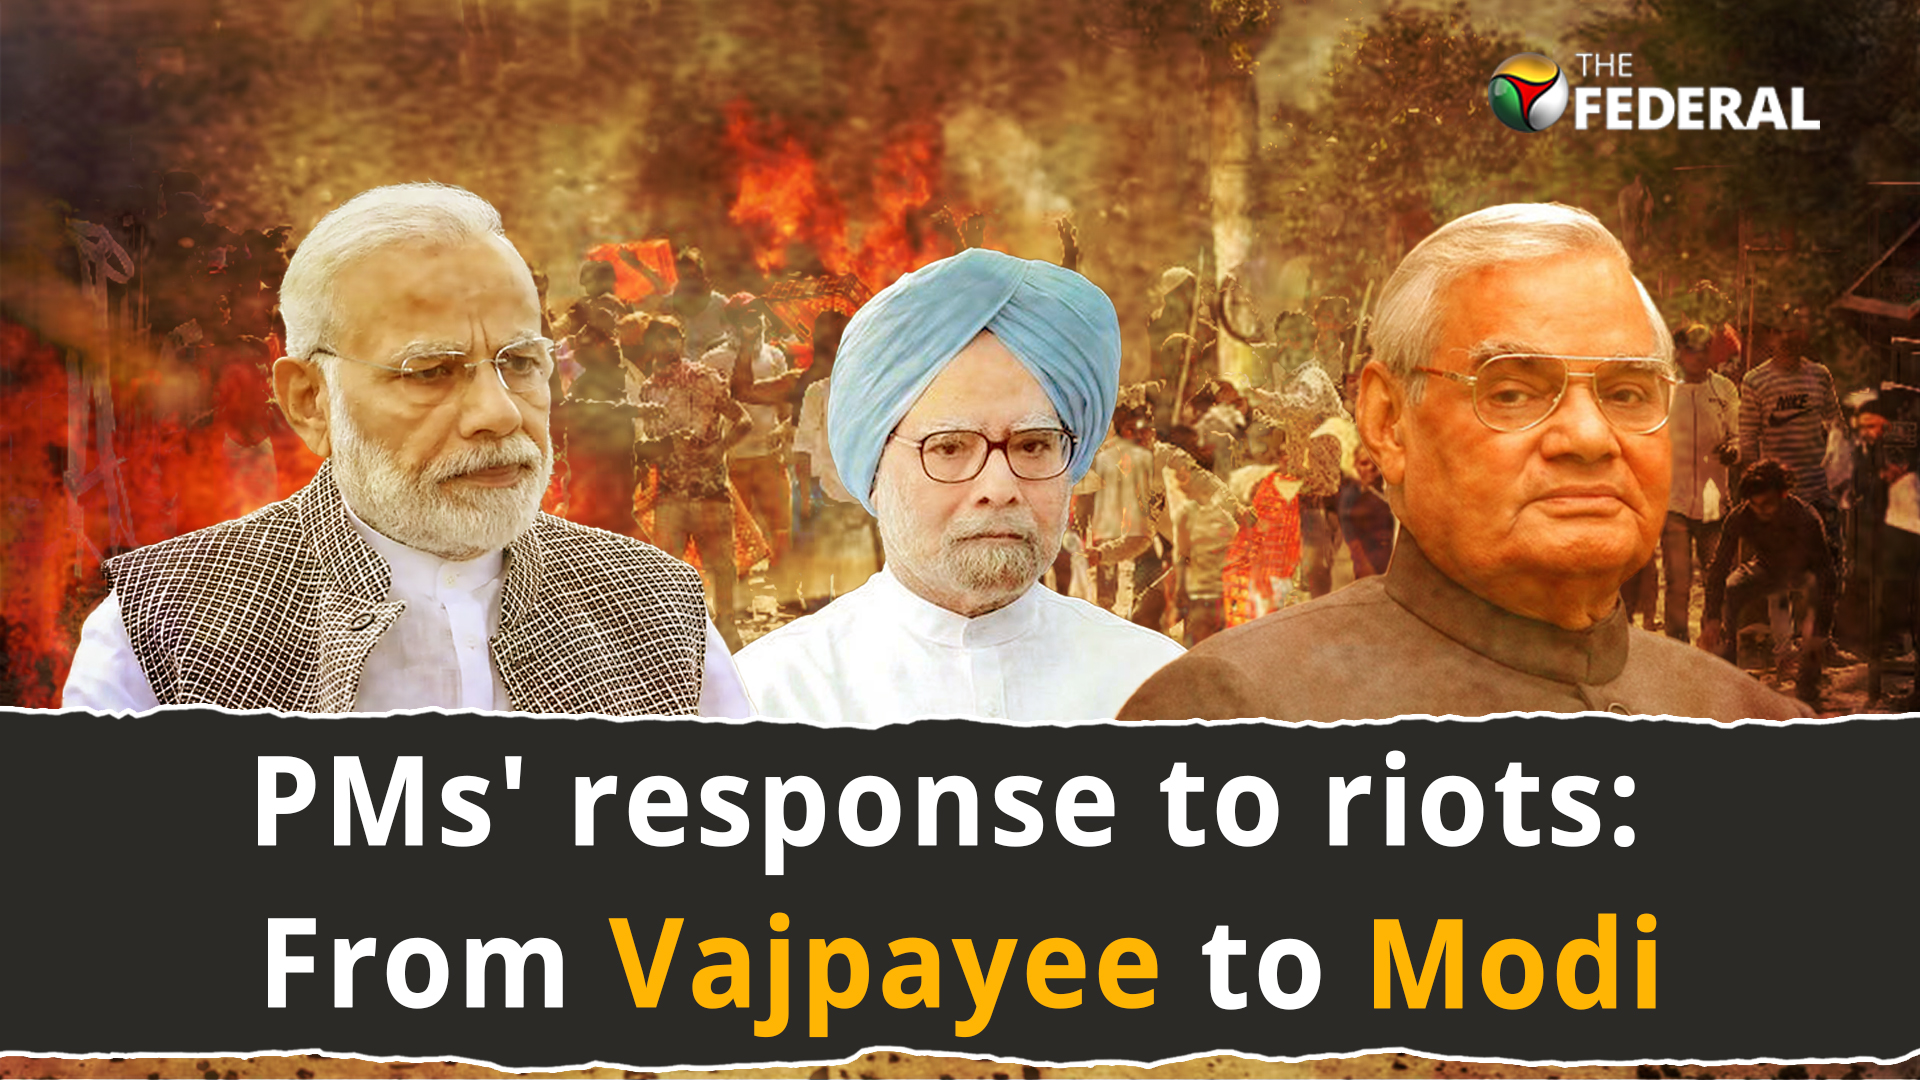 PMs response to riots: From Vajpayee to Modi